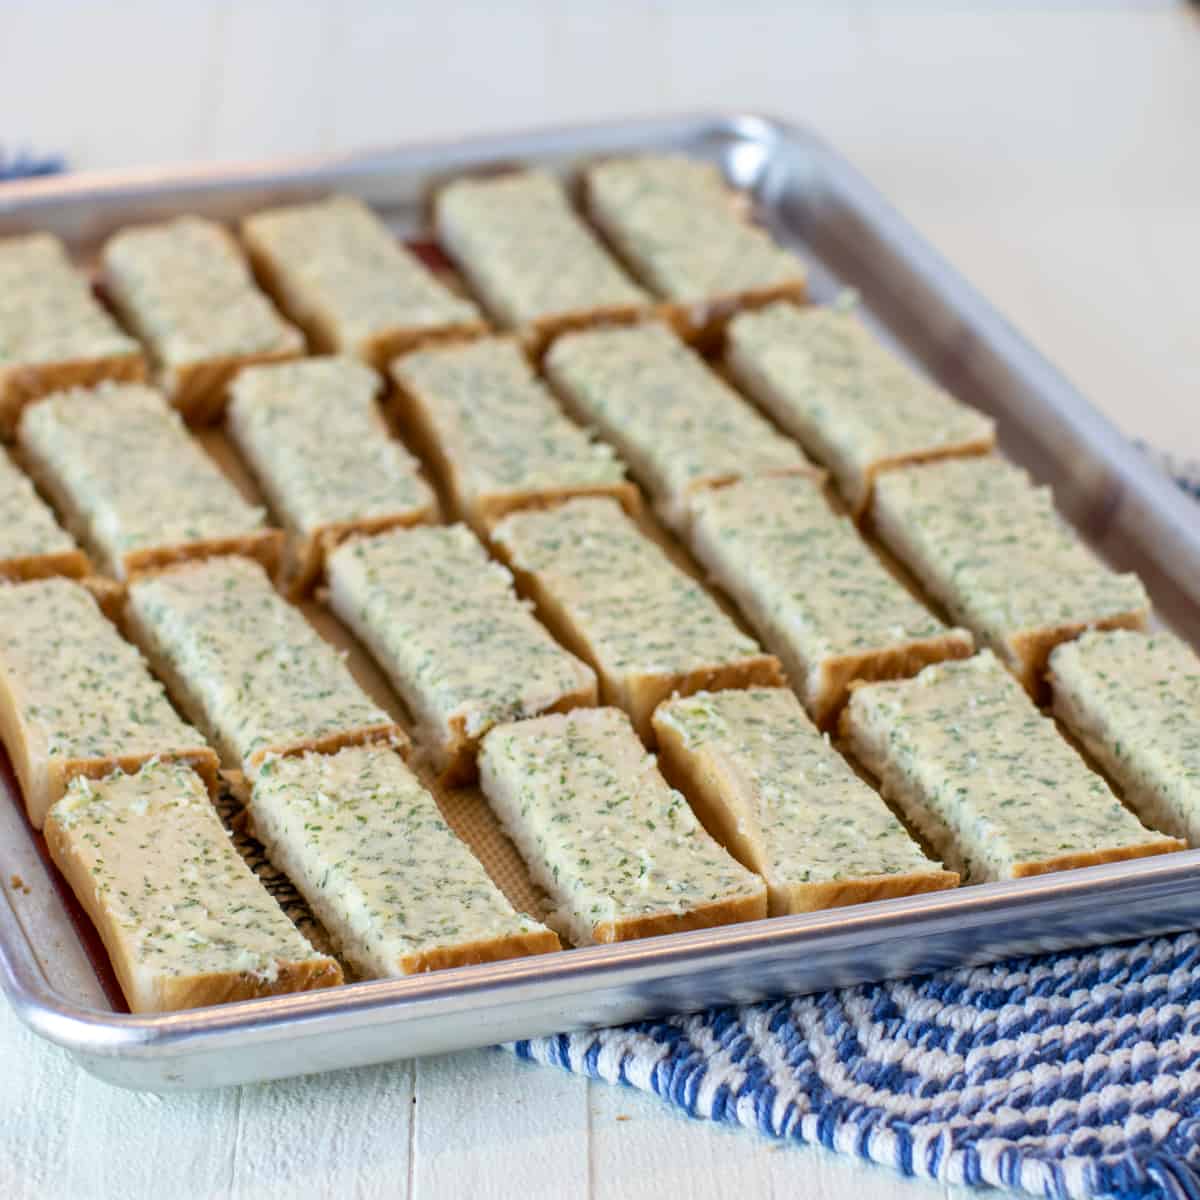 Garlic bread sliced cut into long sticks on a baking sheet and ready to go in the oven.